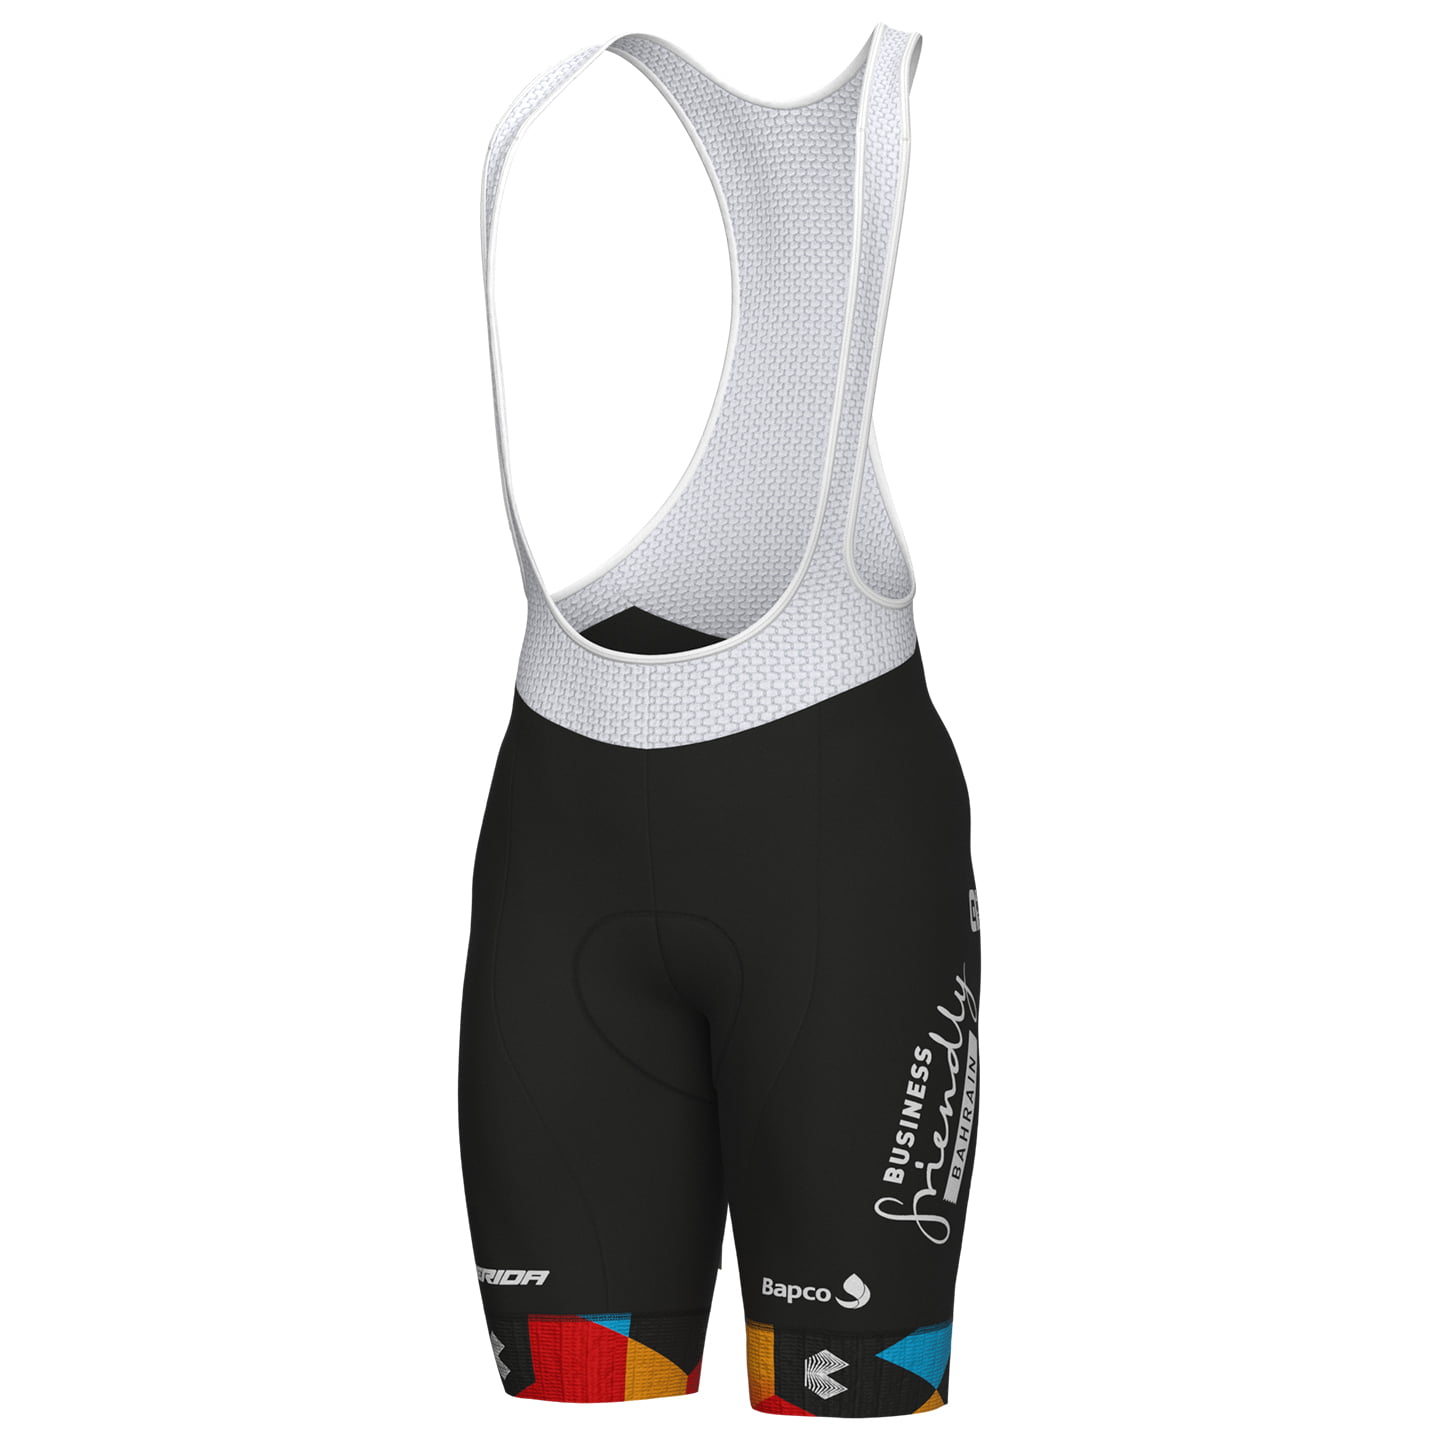 BAHRAIN - VICTORIOUS 2022 Bib Shorts, for men, size 2XL, Cycle trousers, Cycle gear